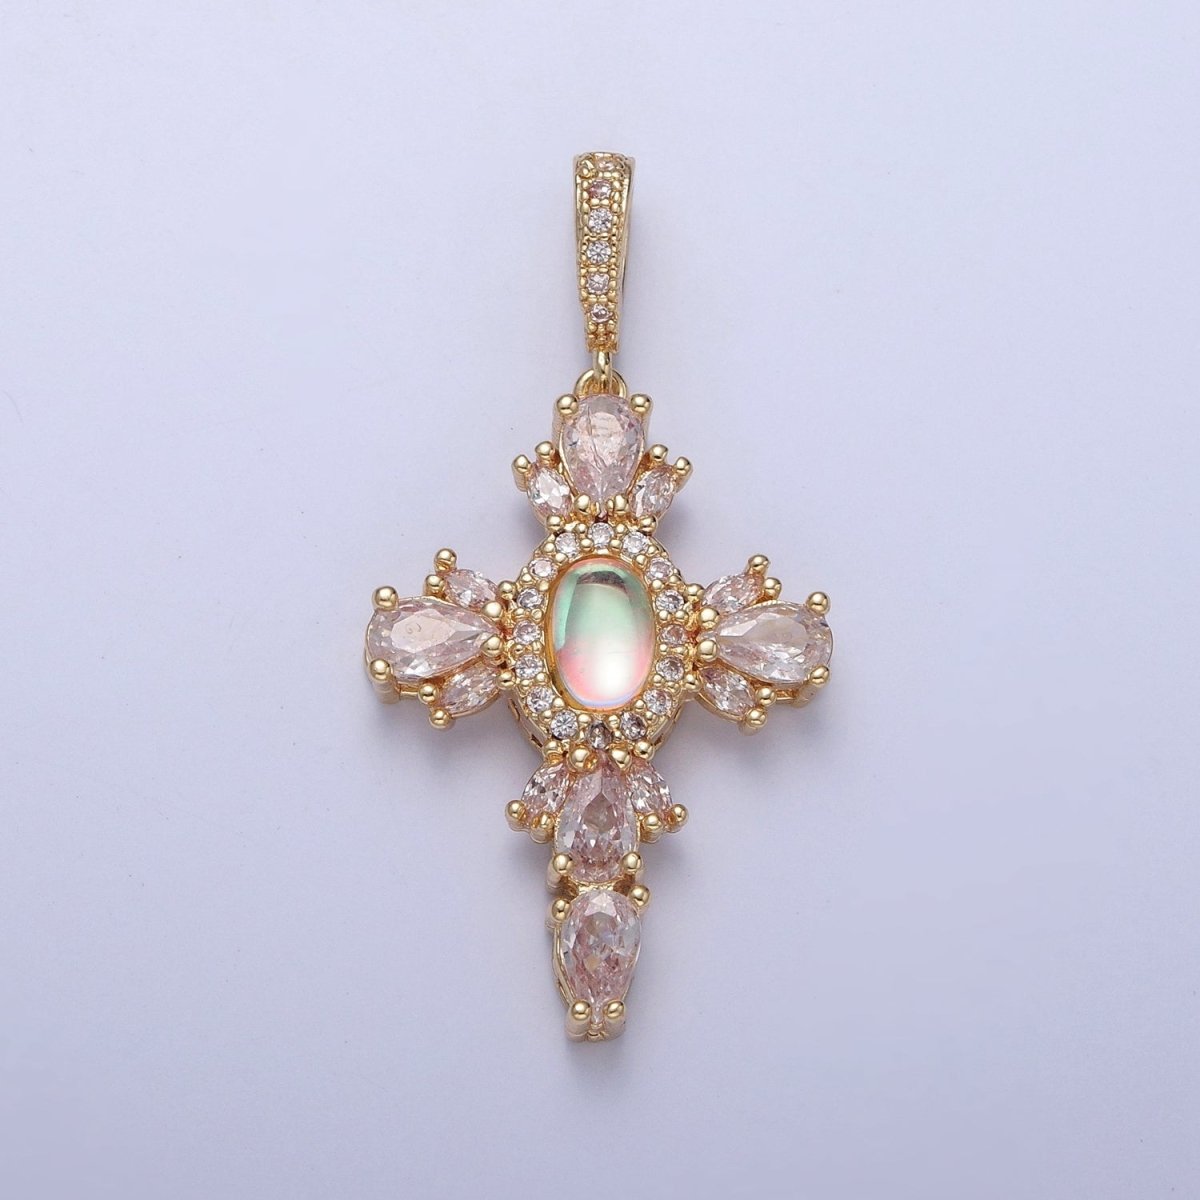 24K Gold Filled Cross Pendant Charm, Micro Pave Clear CZ Cubic Zirconia & Moonstone Religious Jewelry I-351 - DLUXCA